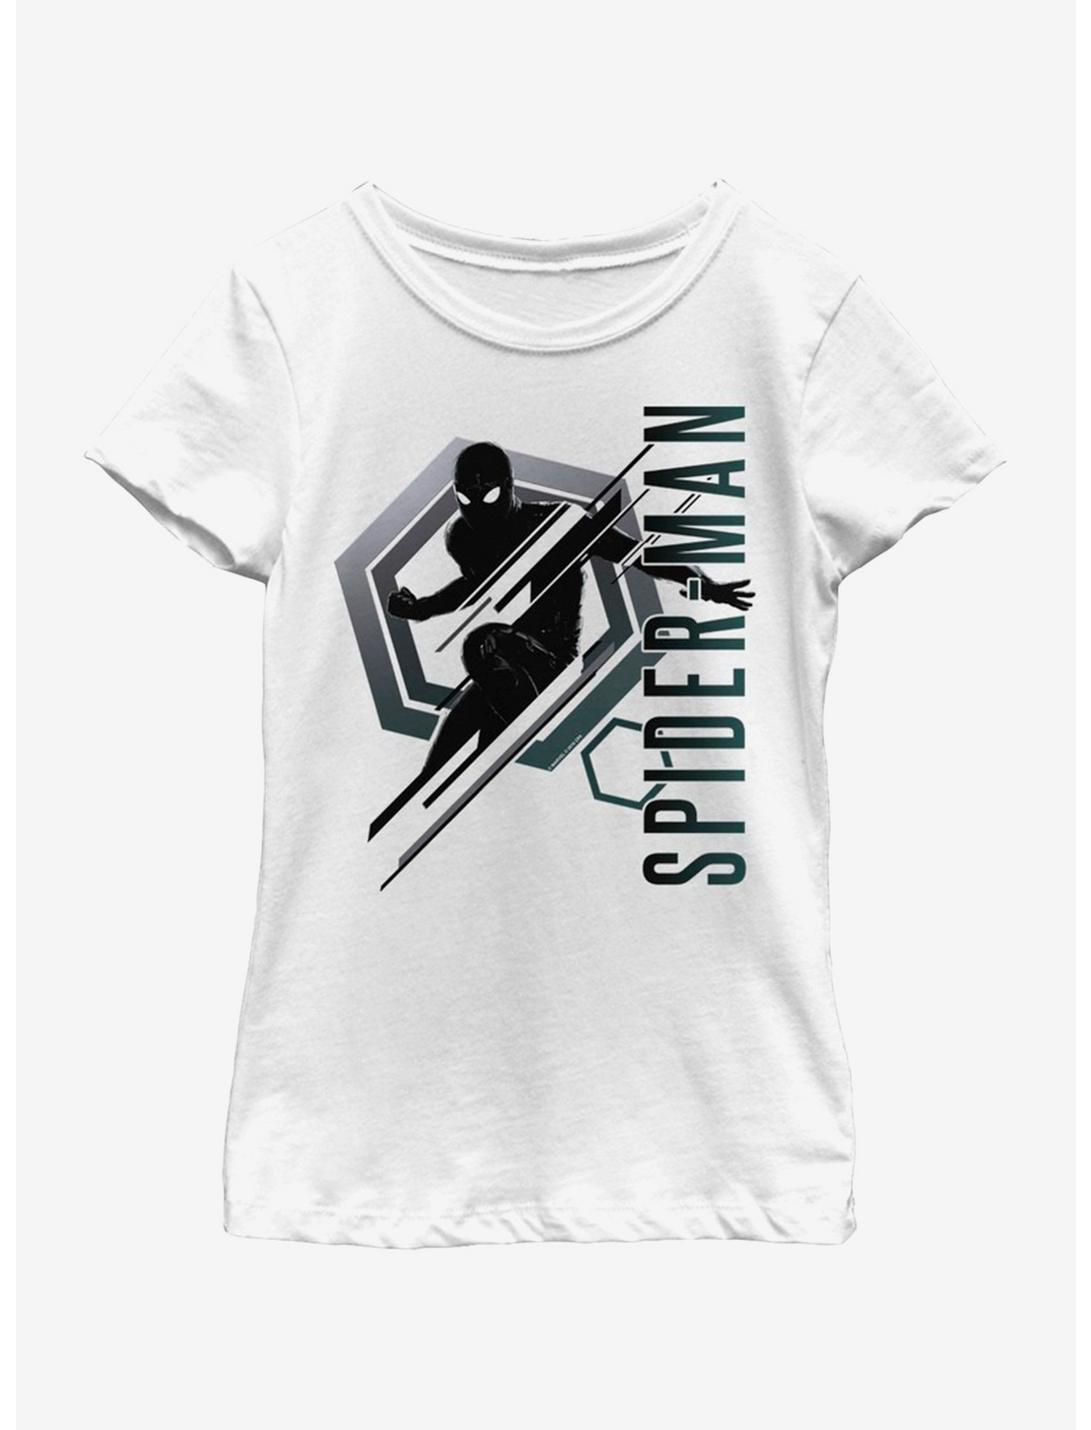 Marvel Spiderman: Far From Home Stealth Spidey Youth Girls T-Shirt, WHITE, hi-res